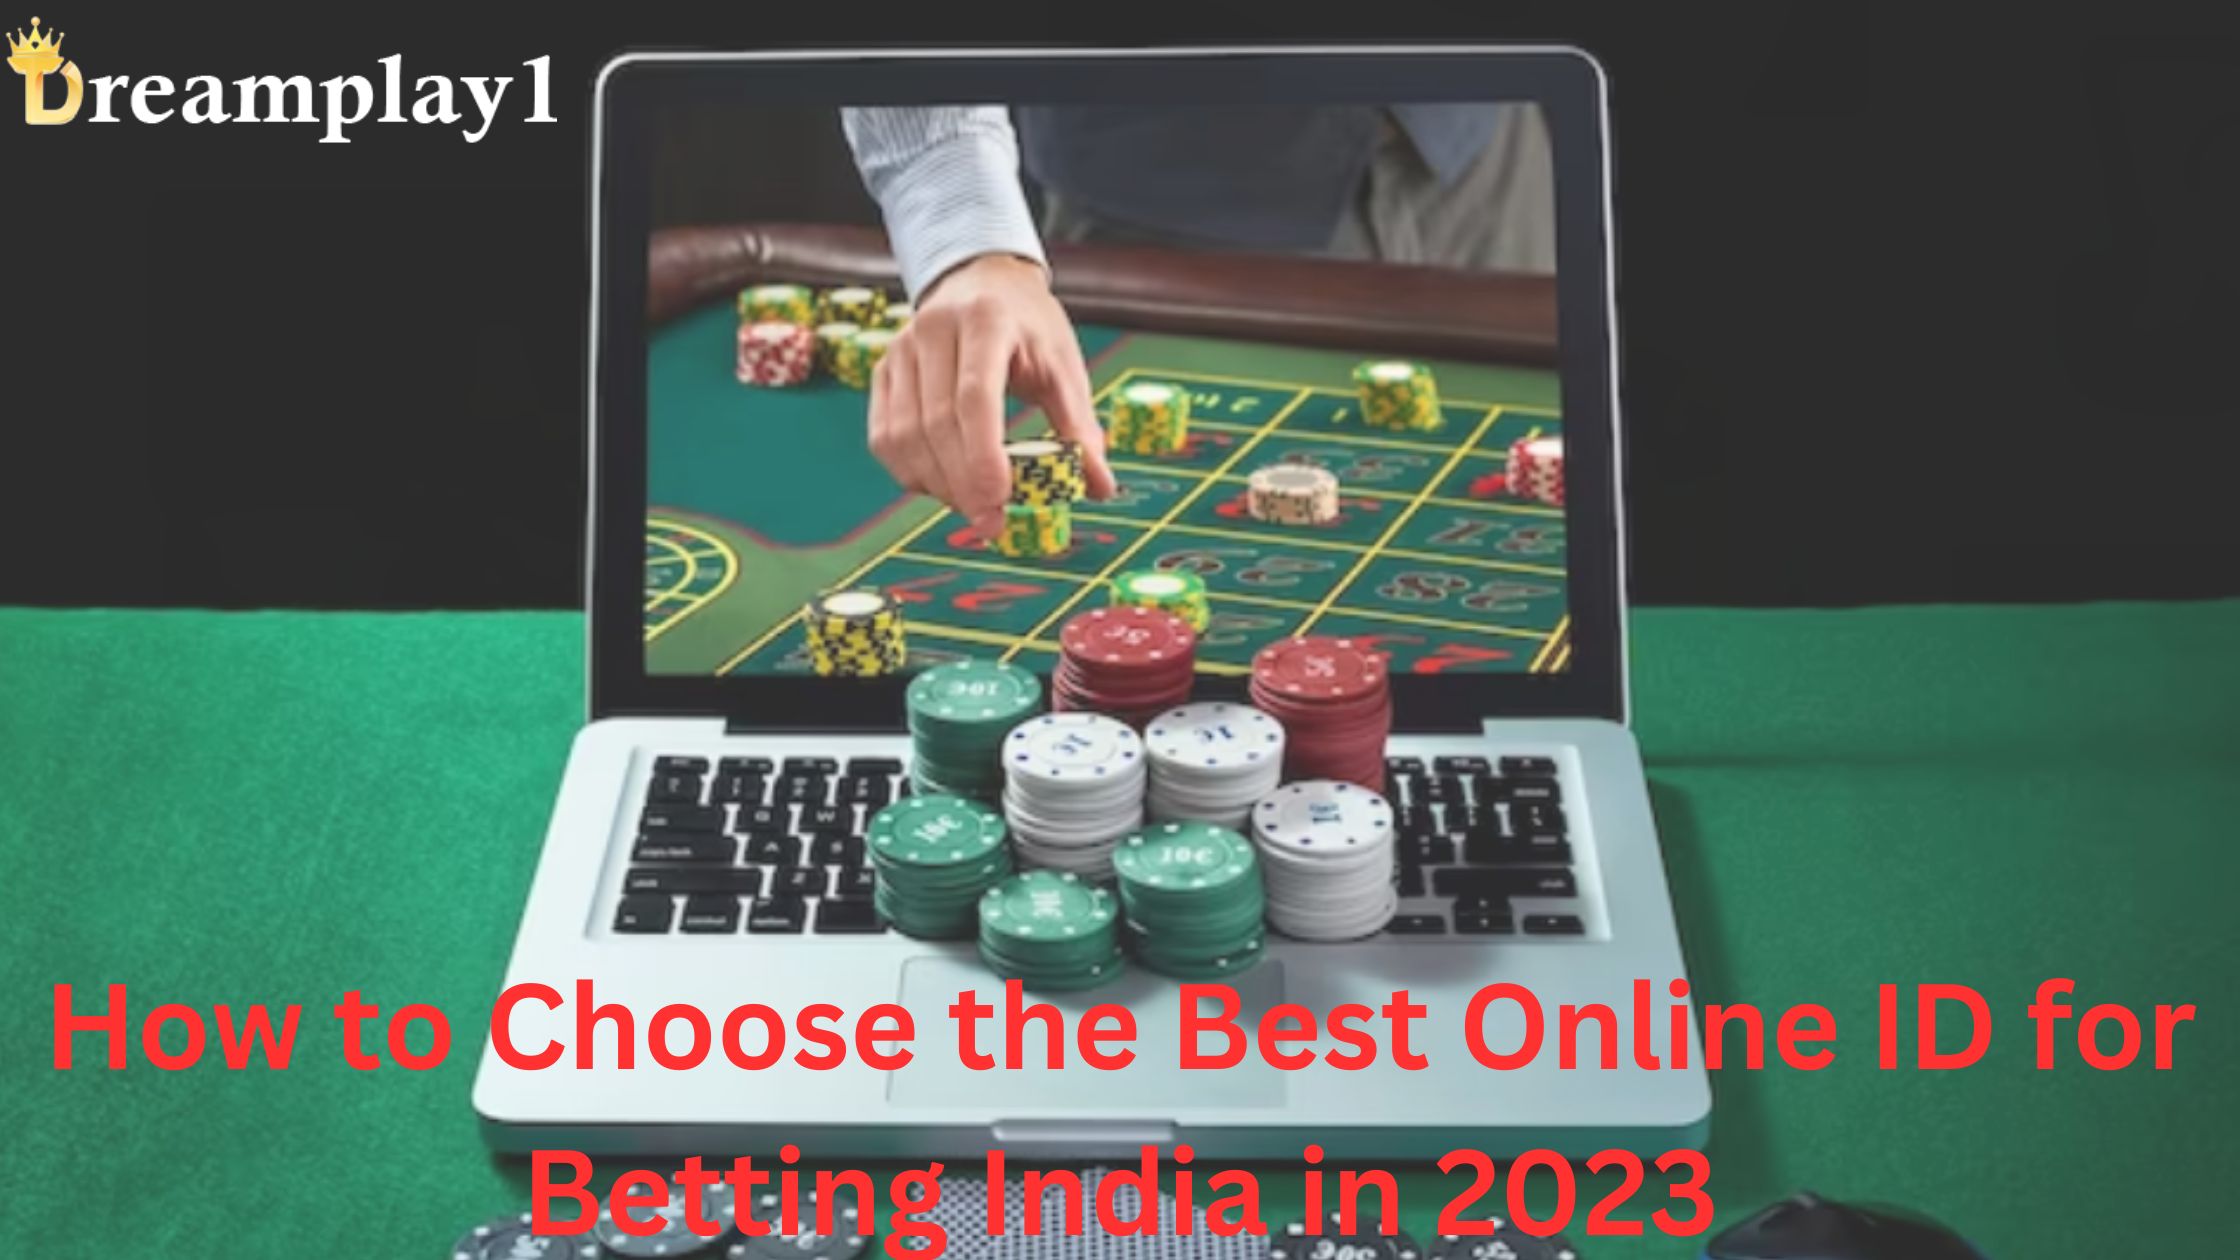 Online ID for Betting India